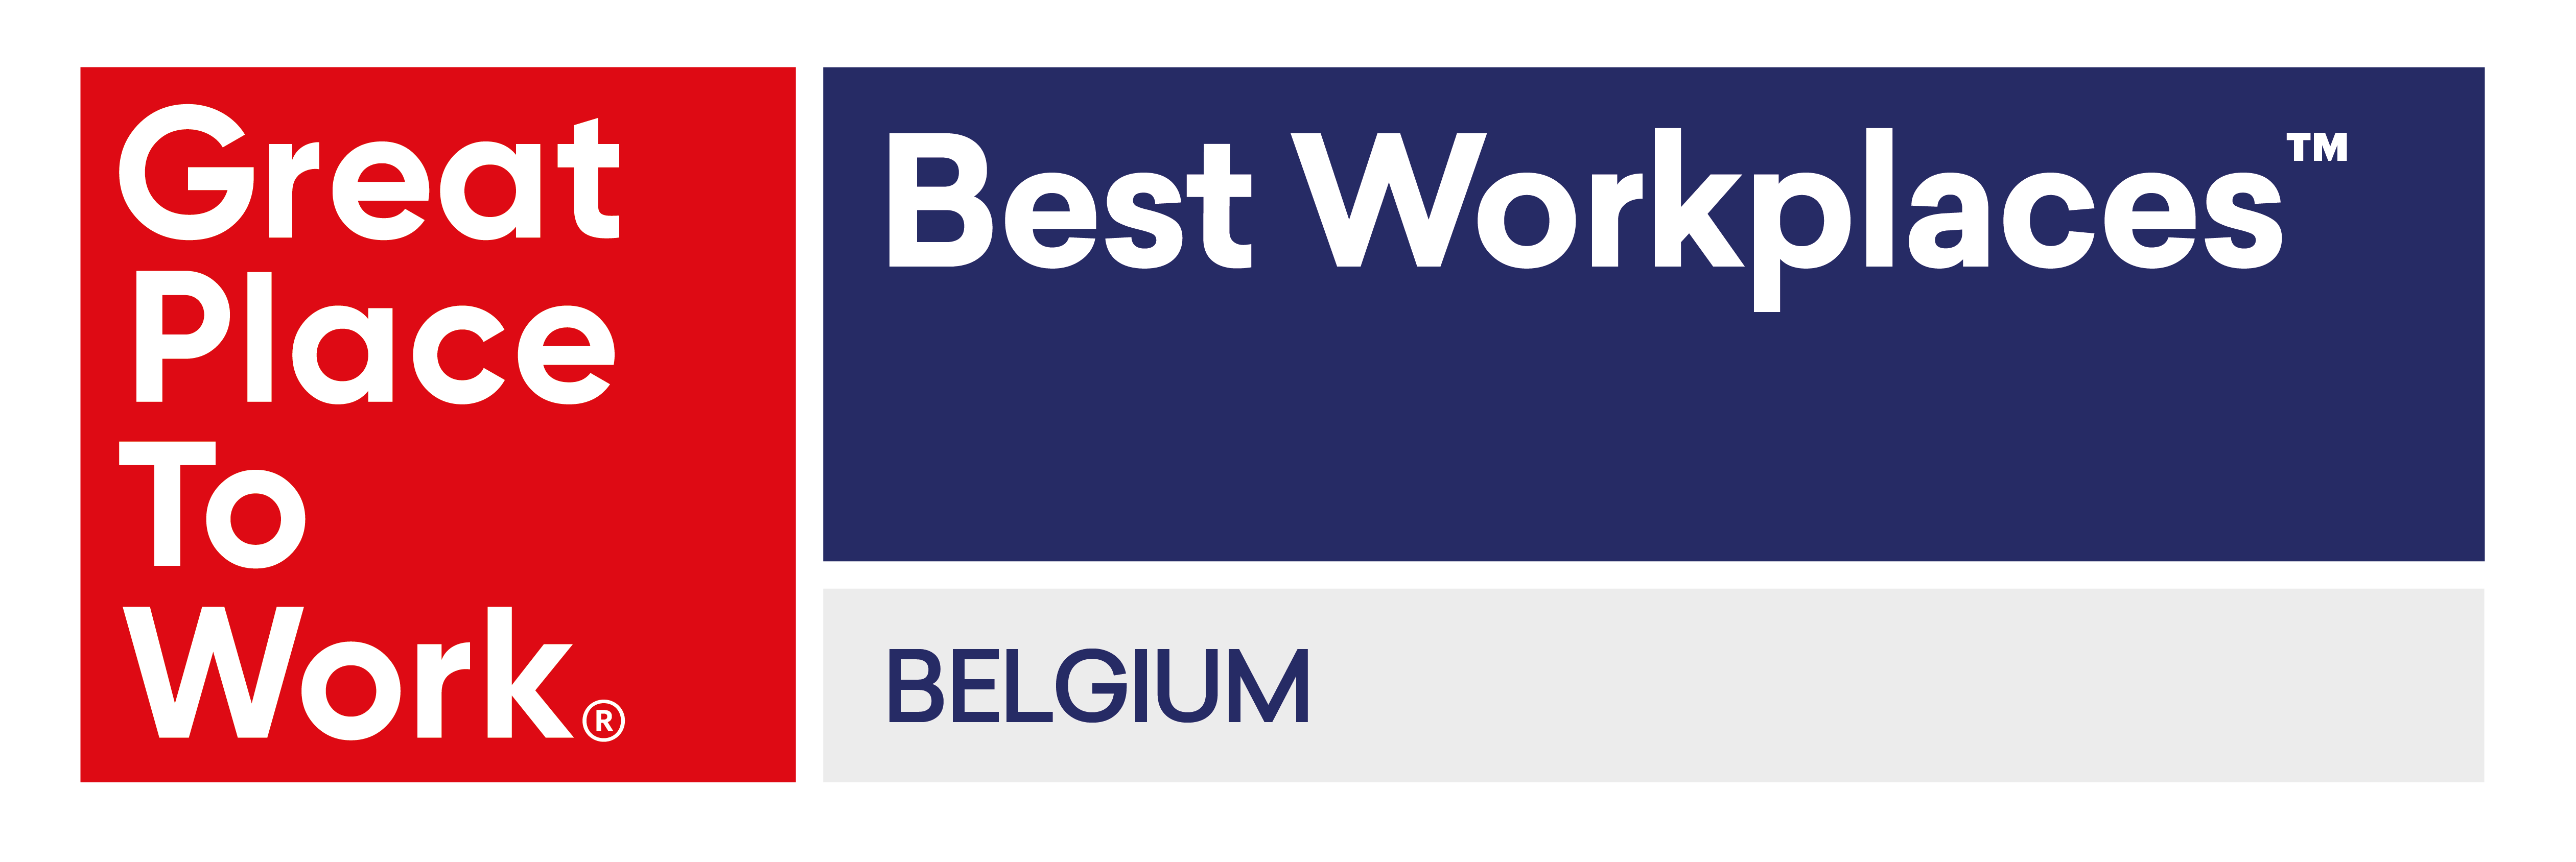 Best Workplaces BELGIUM WITHOUT DATE 01